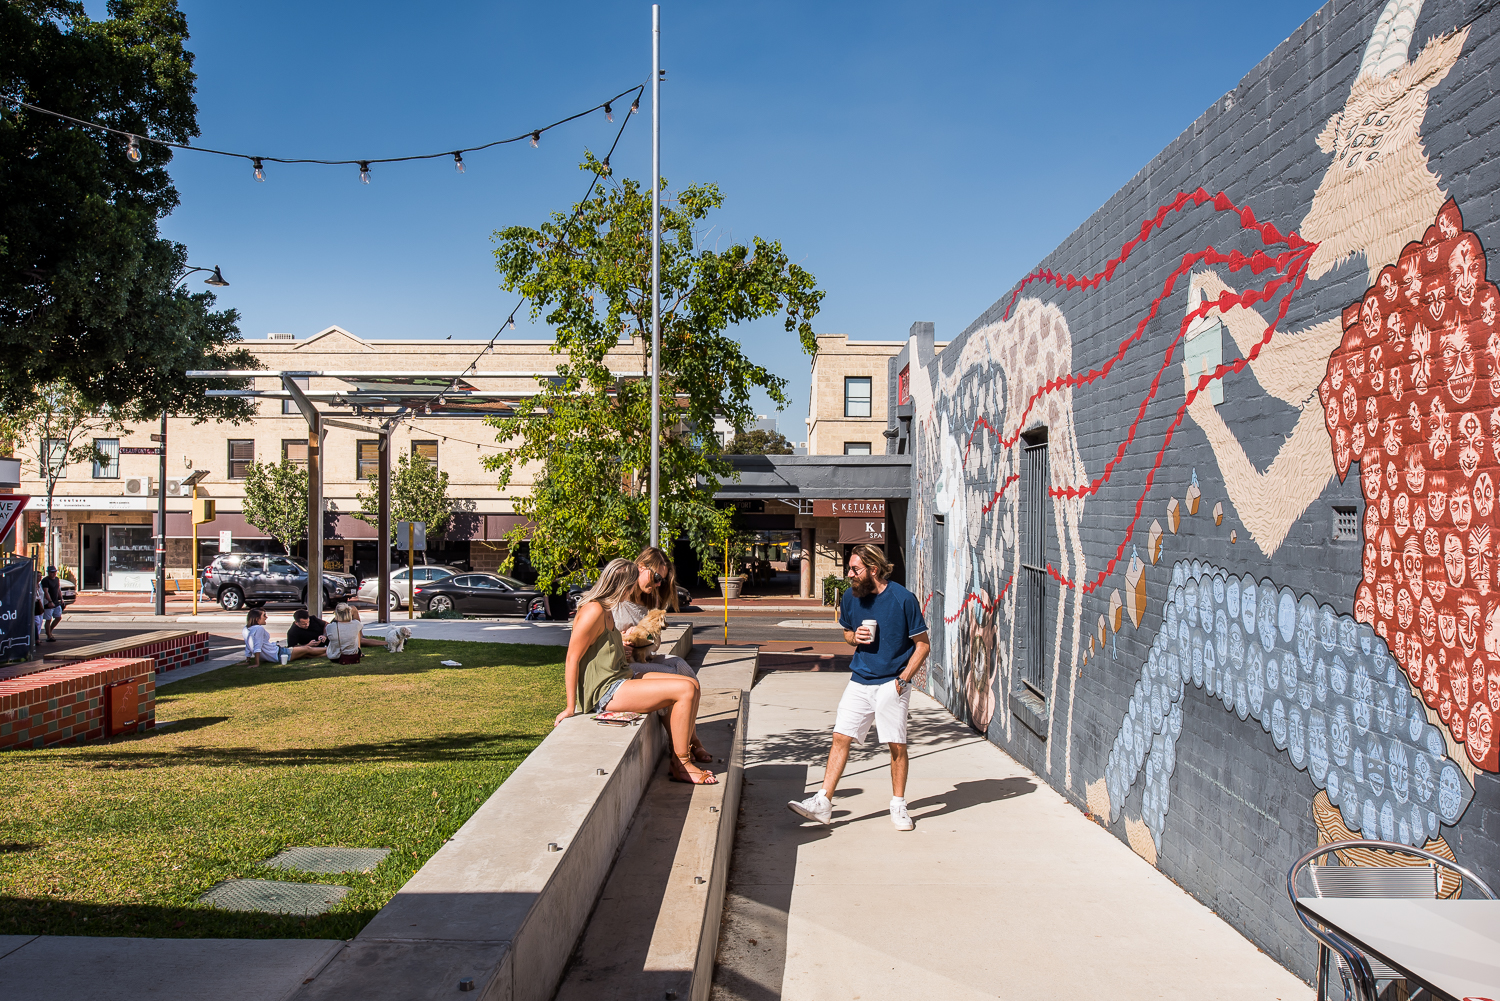 Picture shpwing Mary Street piazza on Beaufort Street, Highgate, Western Australia. One man is drinking a coffee and two women are talking. A large mural by Rob Jenkins is shown on a wall to the right whilst a grassed area is to the left with Beaufort Street in the background